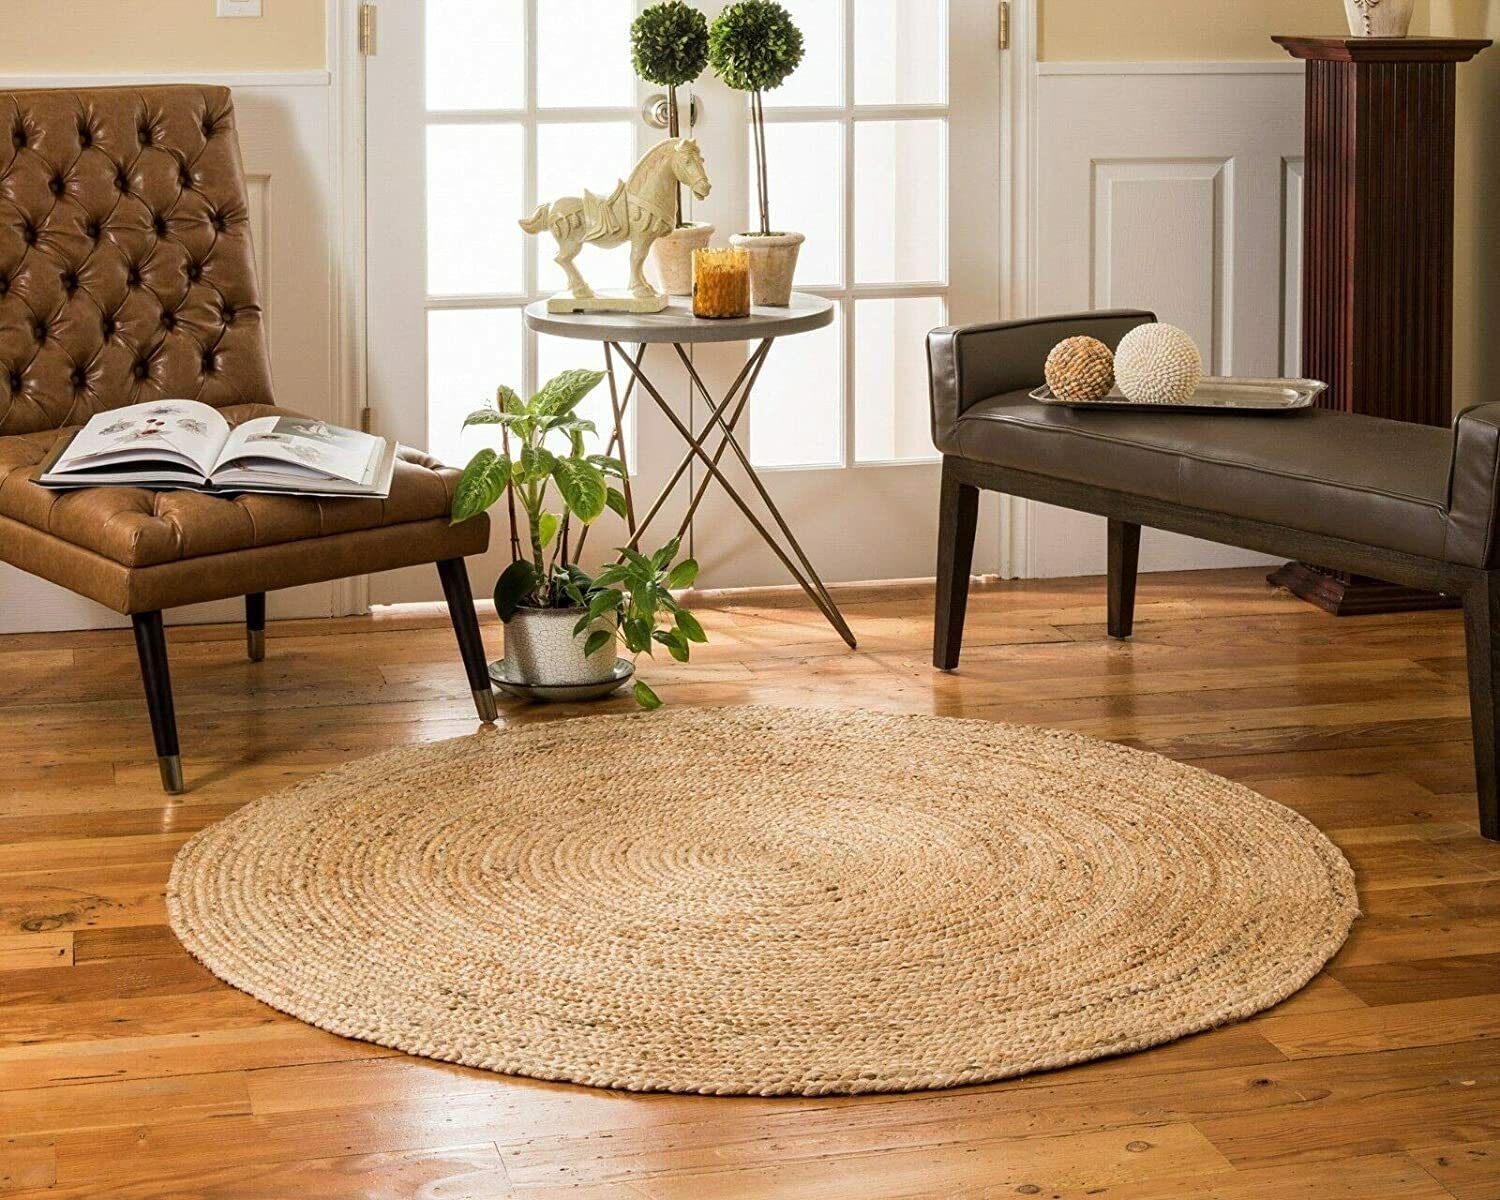 120Cm, Hand Woven Braided Jute Area Rug, Round, Reversible,Color May Vary |  Ebay Throughout Hand Woven Braided Rugs (Photo 15 of 15)